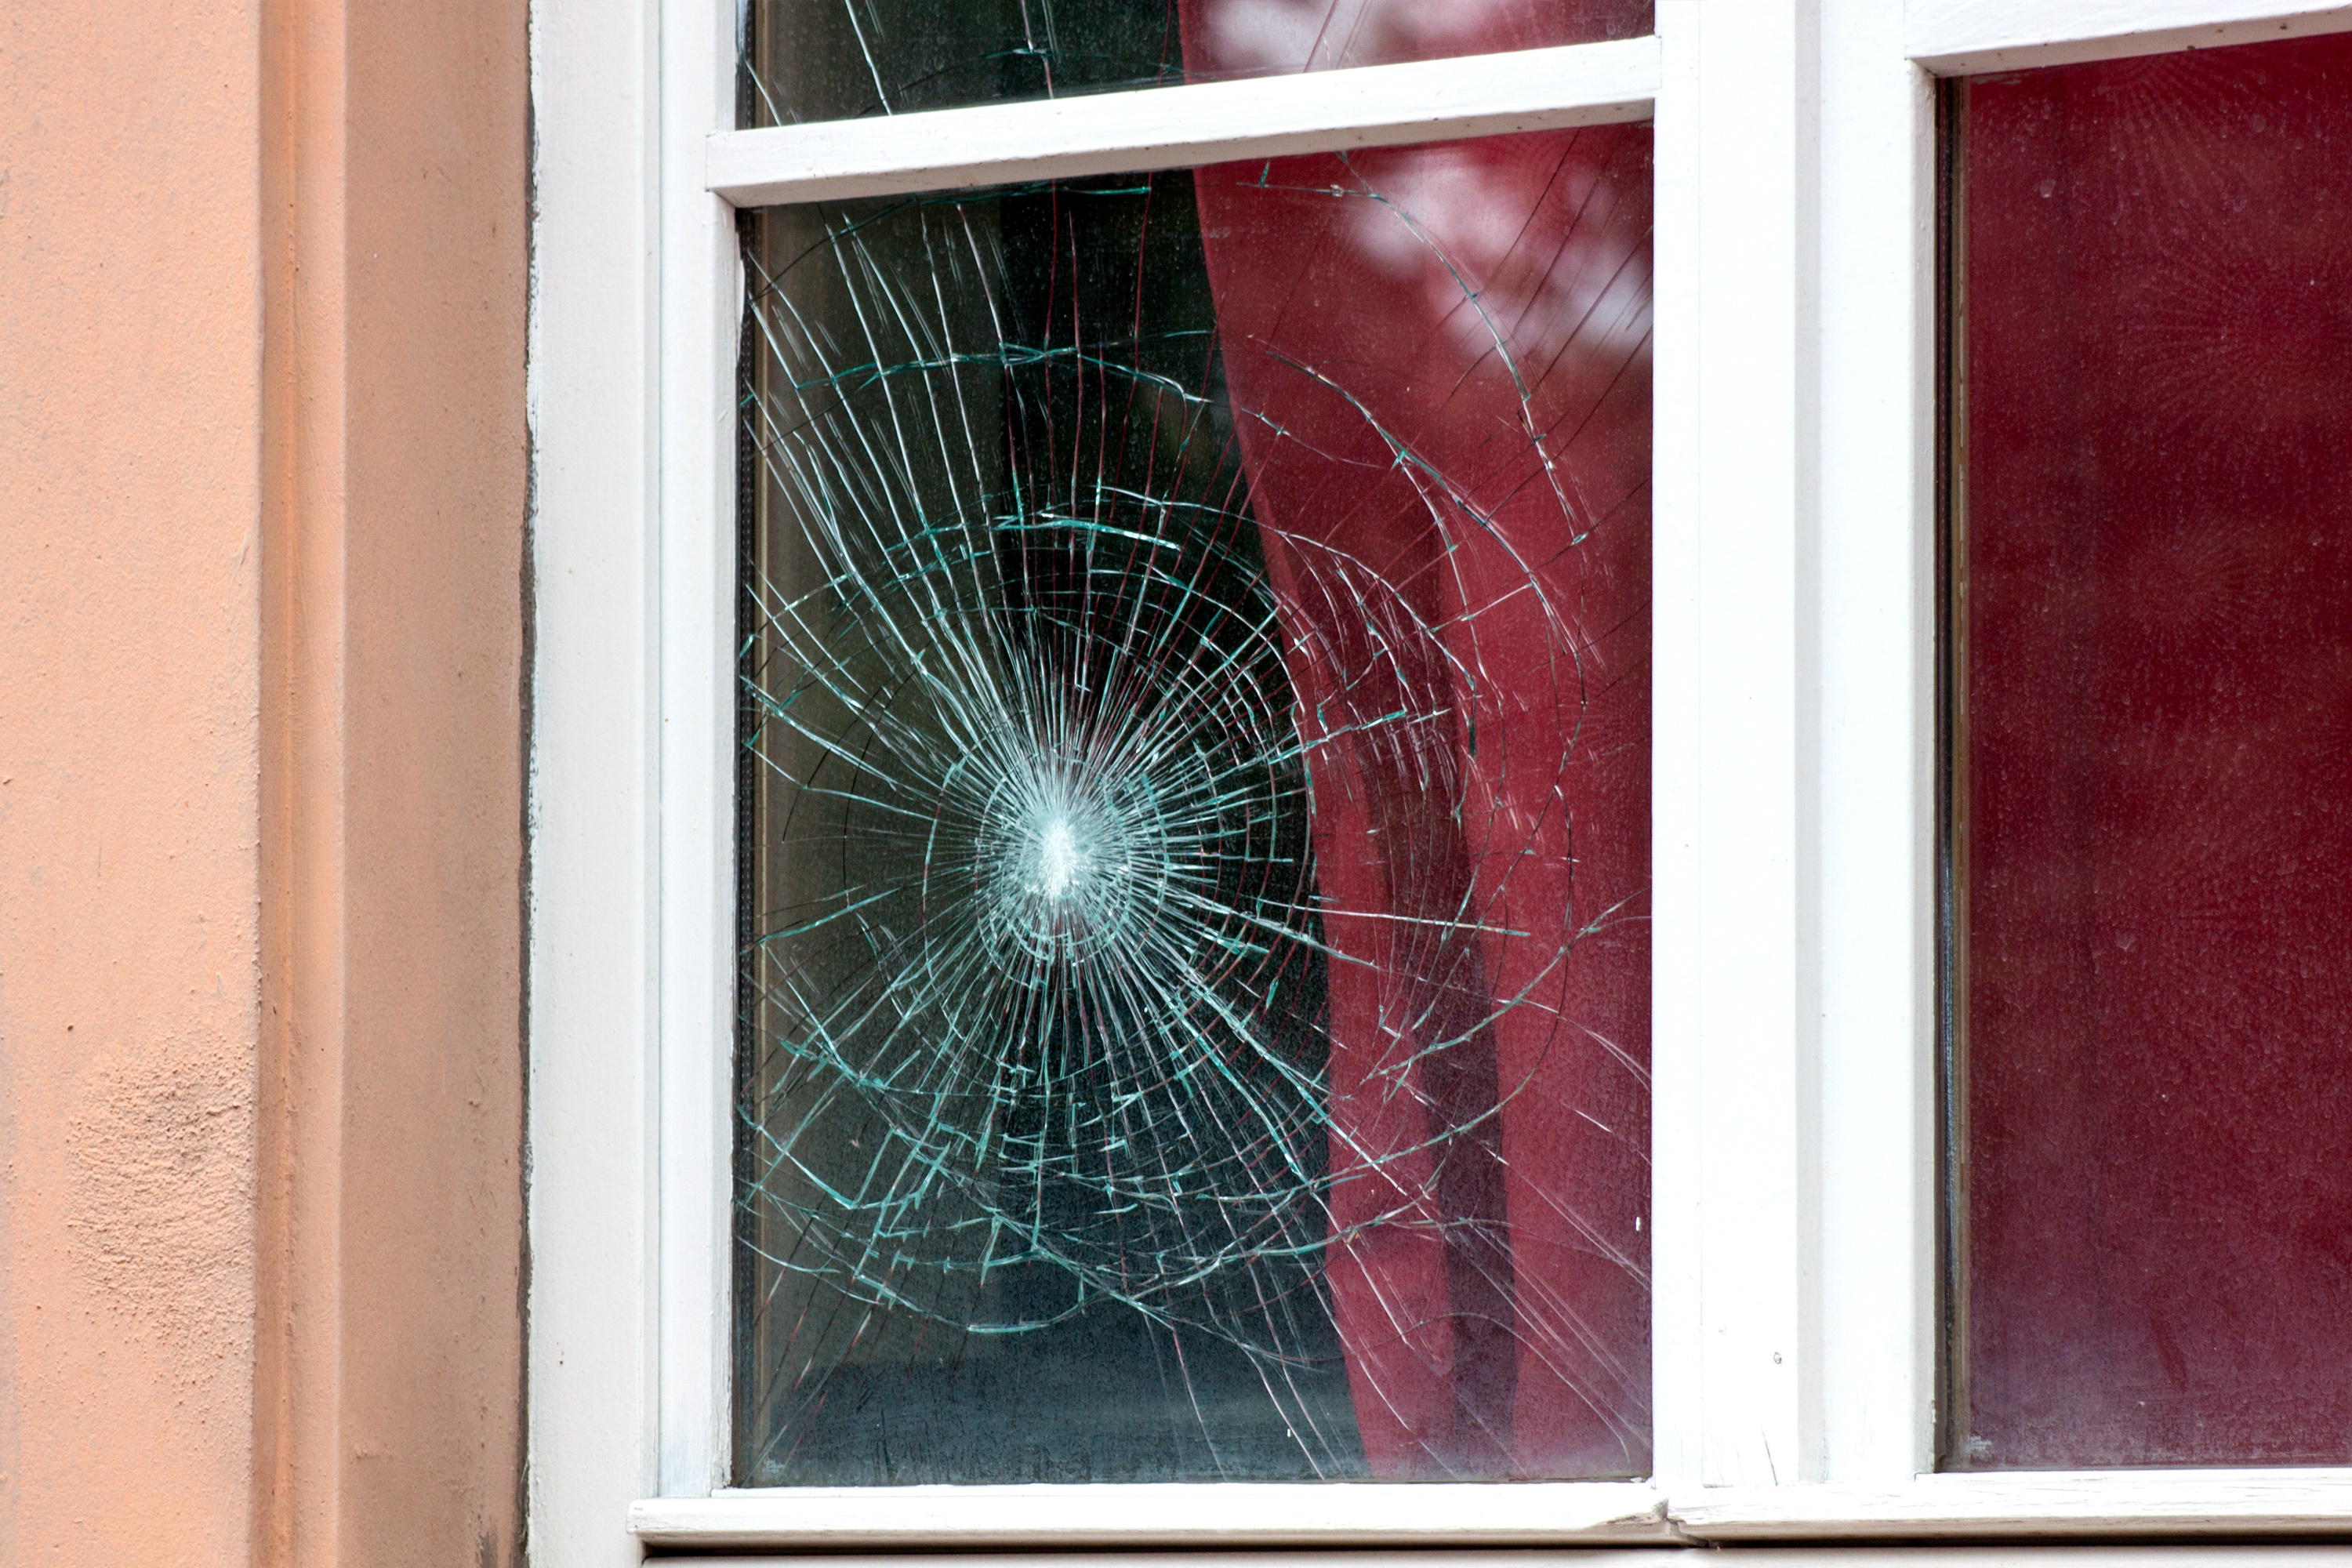 How to replace single pane windows with double pane